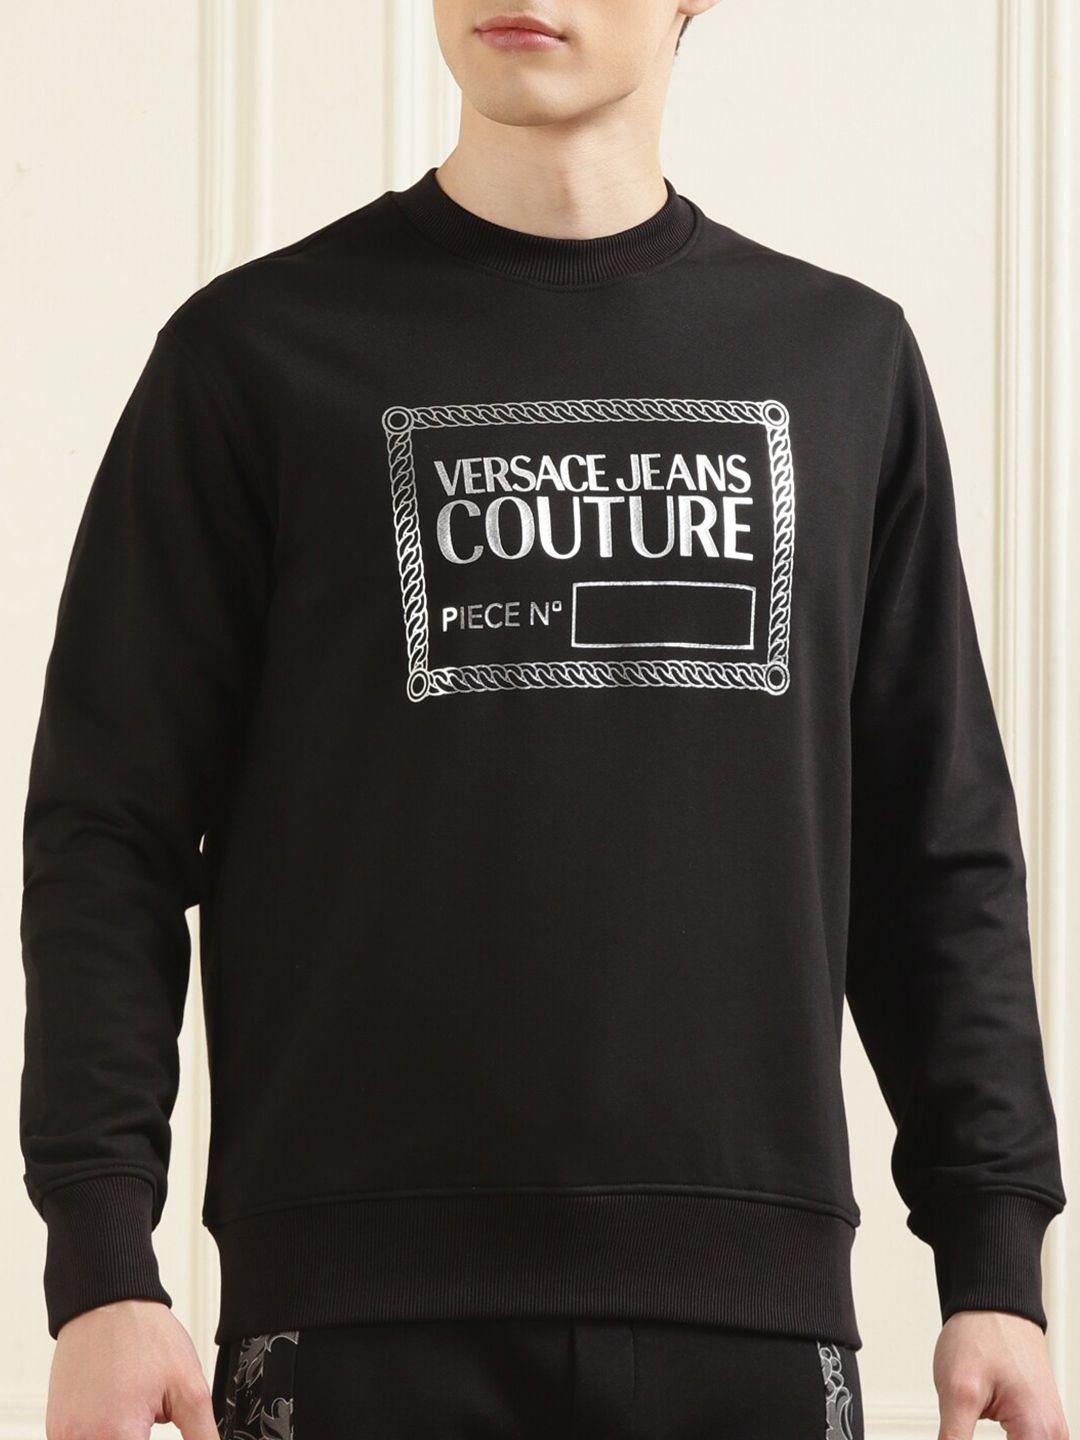 versace jeans couture typography printed pullover sweatshirt